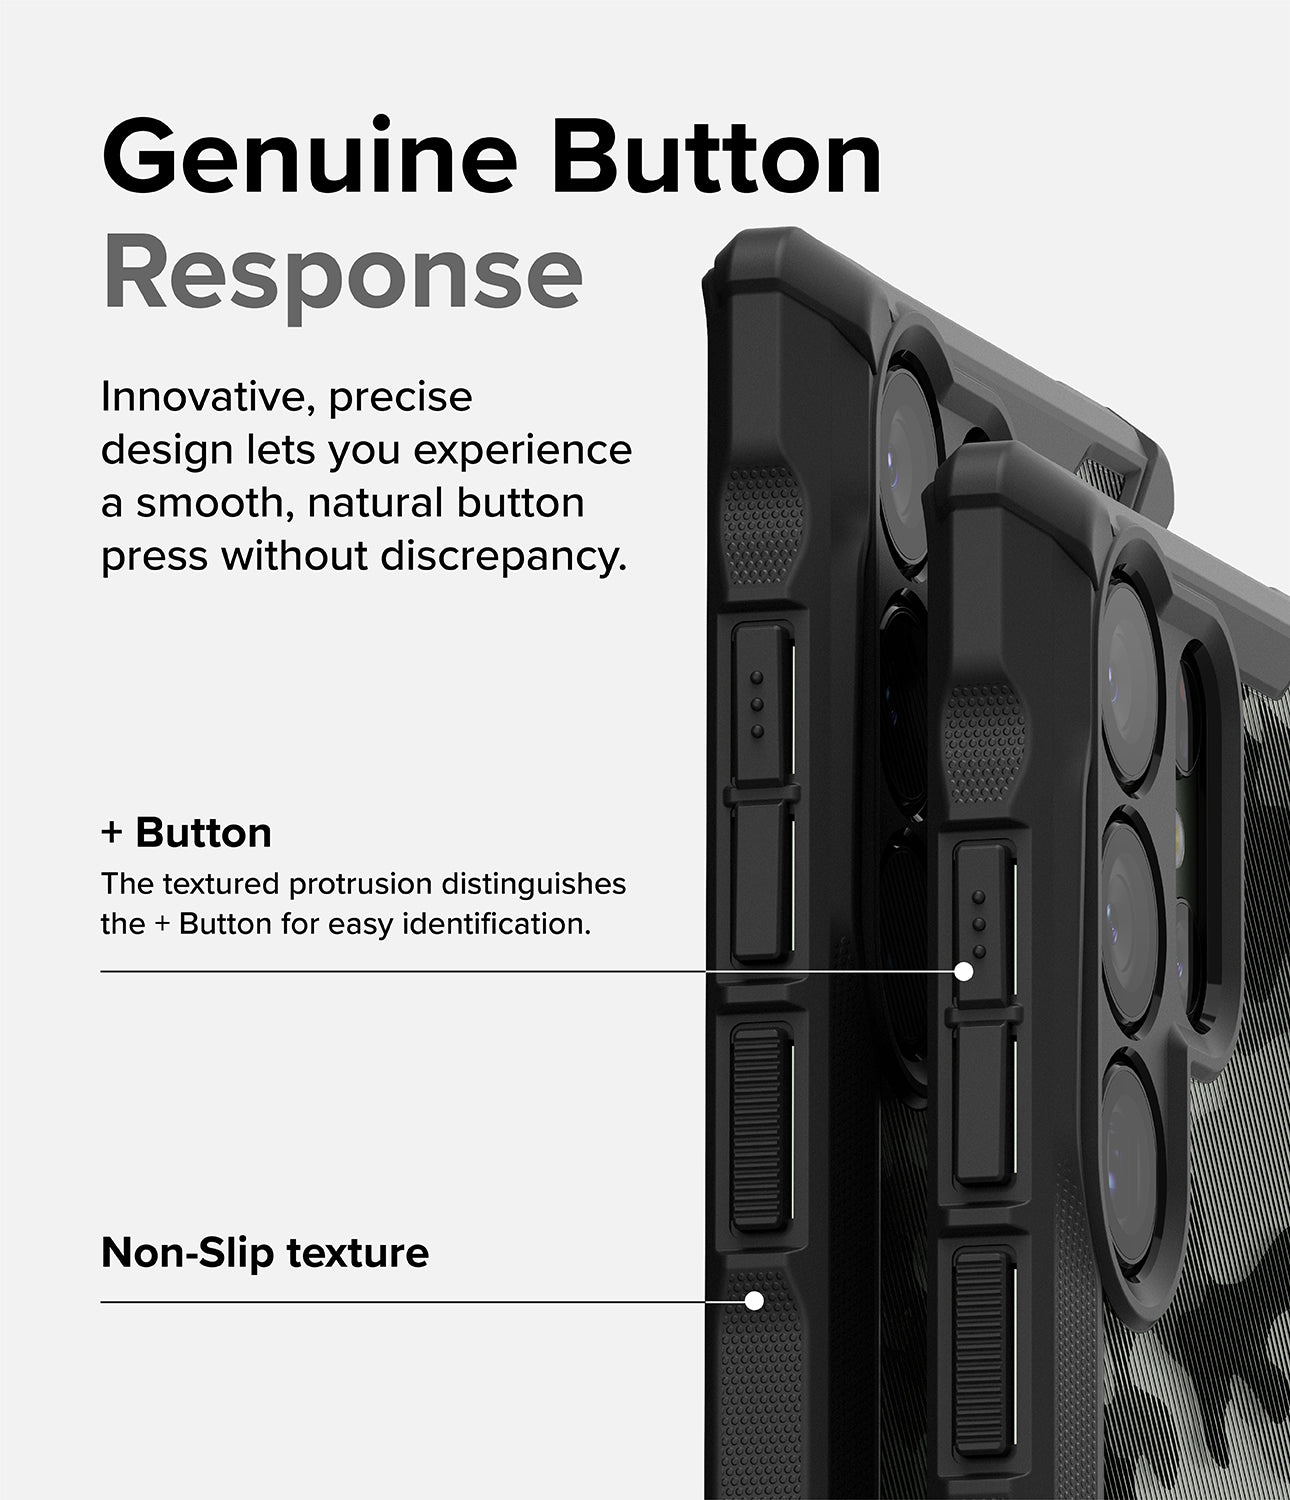 Galaxy S23 Ultra Case | Fusion-X - Camo Black - Genuine Button Response. Innovative, precise design lets you experience a smooth, natural button press without discrepancy. + Button. The textured protrusion distinguishes the + Button for easy identification. Non-Slip texture.